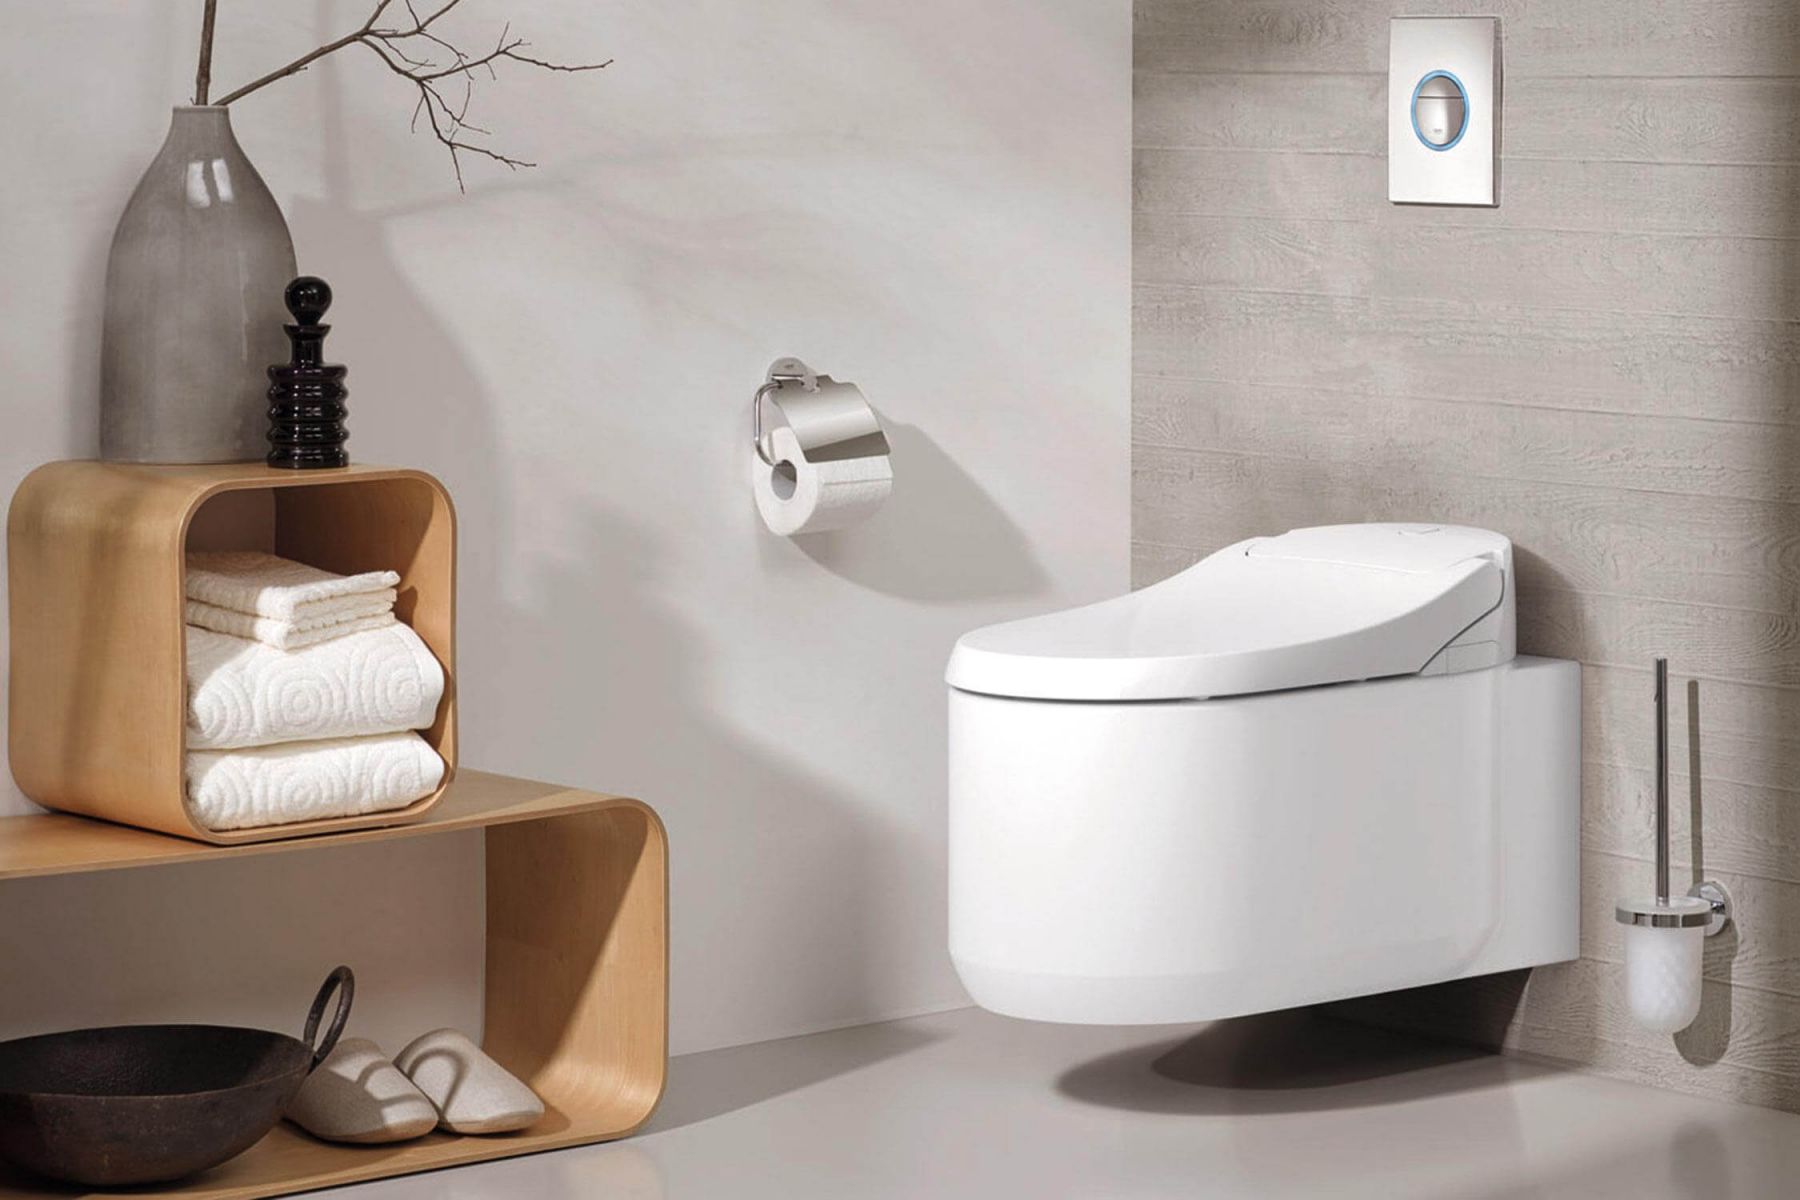 Instant Heating Smart Toilets vs. Thermal Storage Smart Toilets